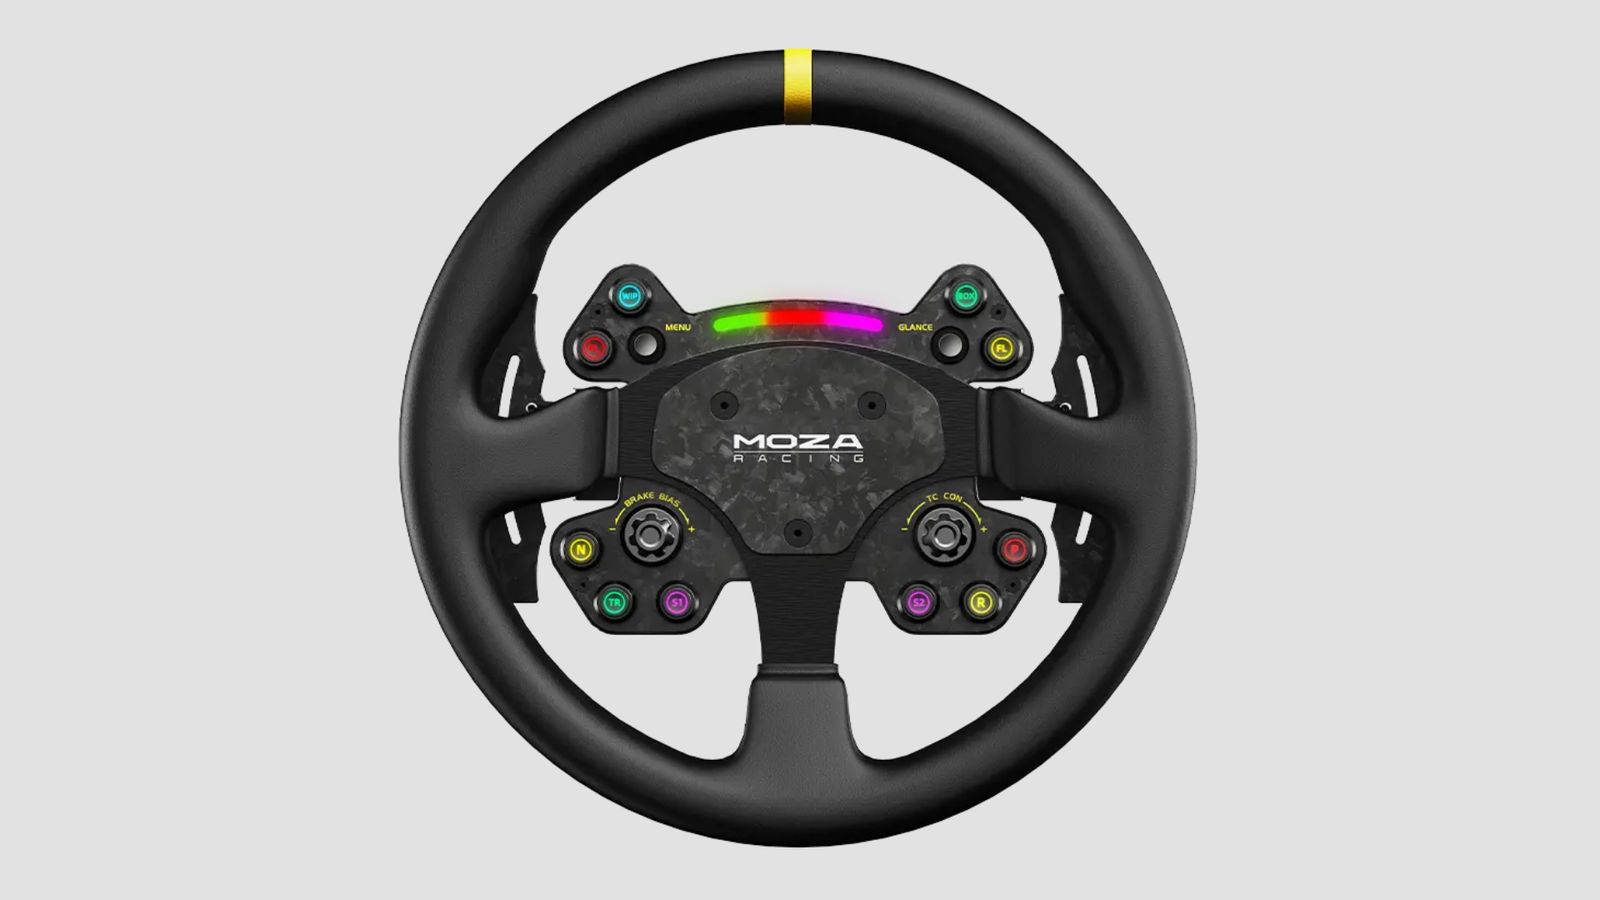 Best wheel for F1 22 - MOZA RS V2 product image of a black-rimmed wheel featuring multicoloured buttons and LEDs as well as a yellow central line at the top.